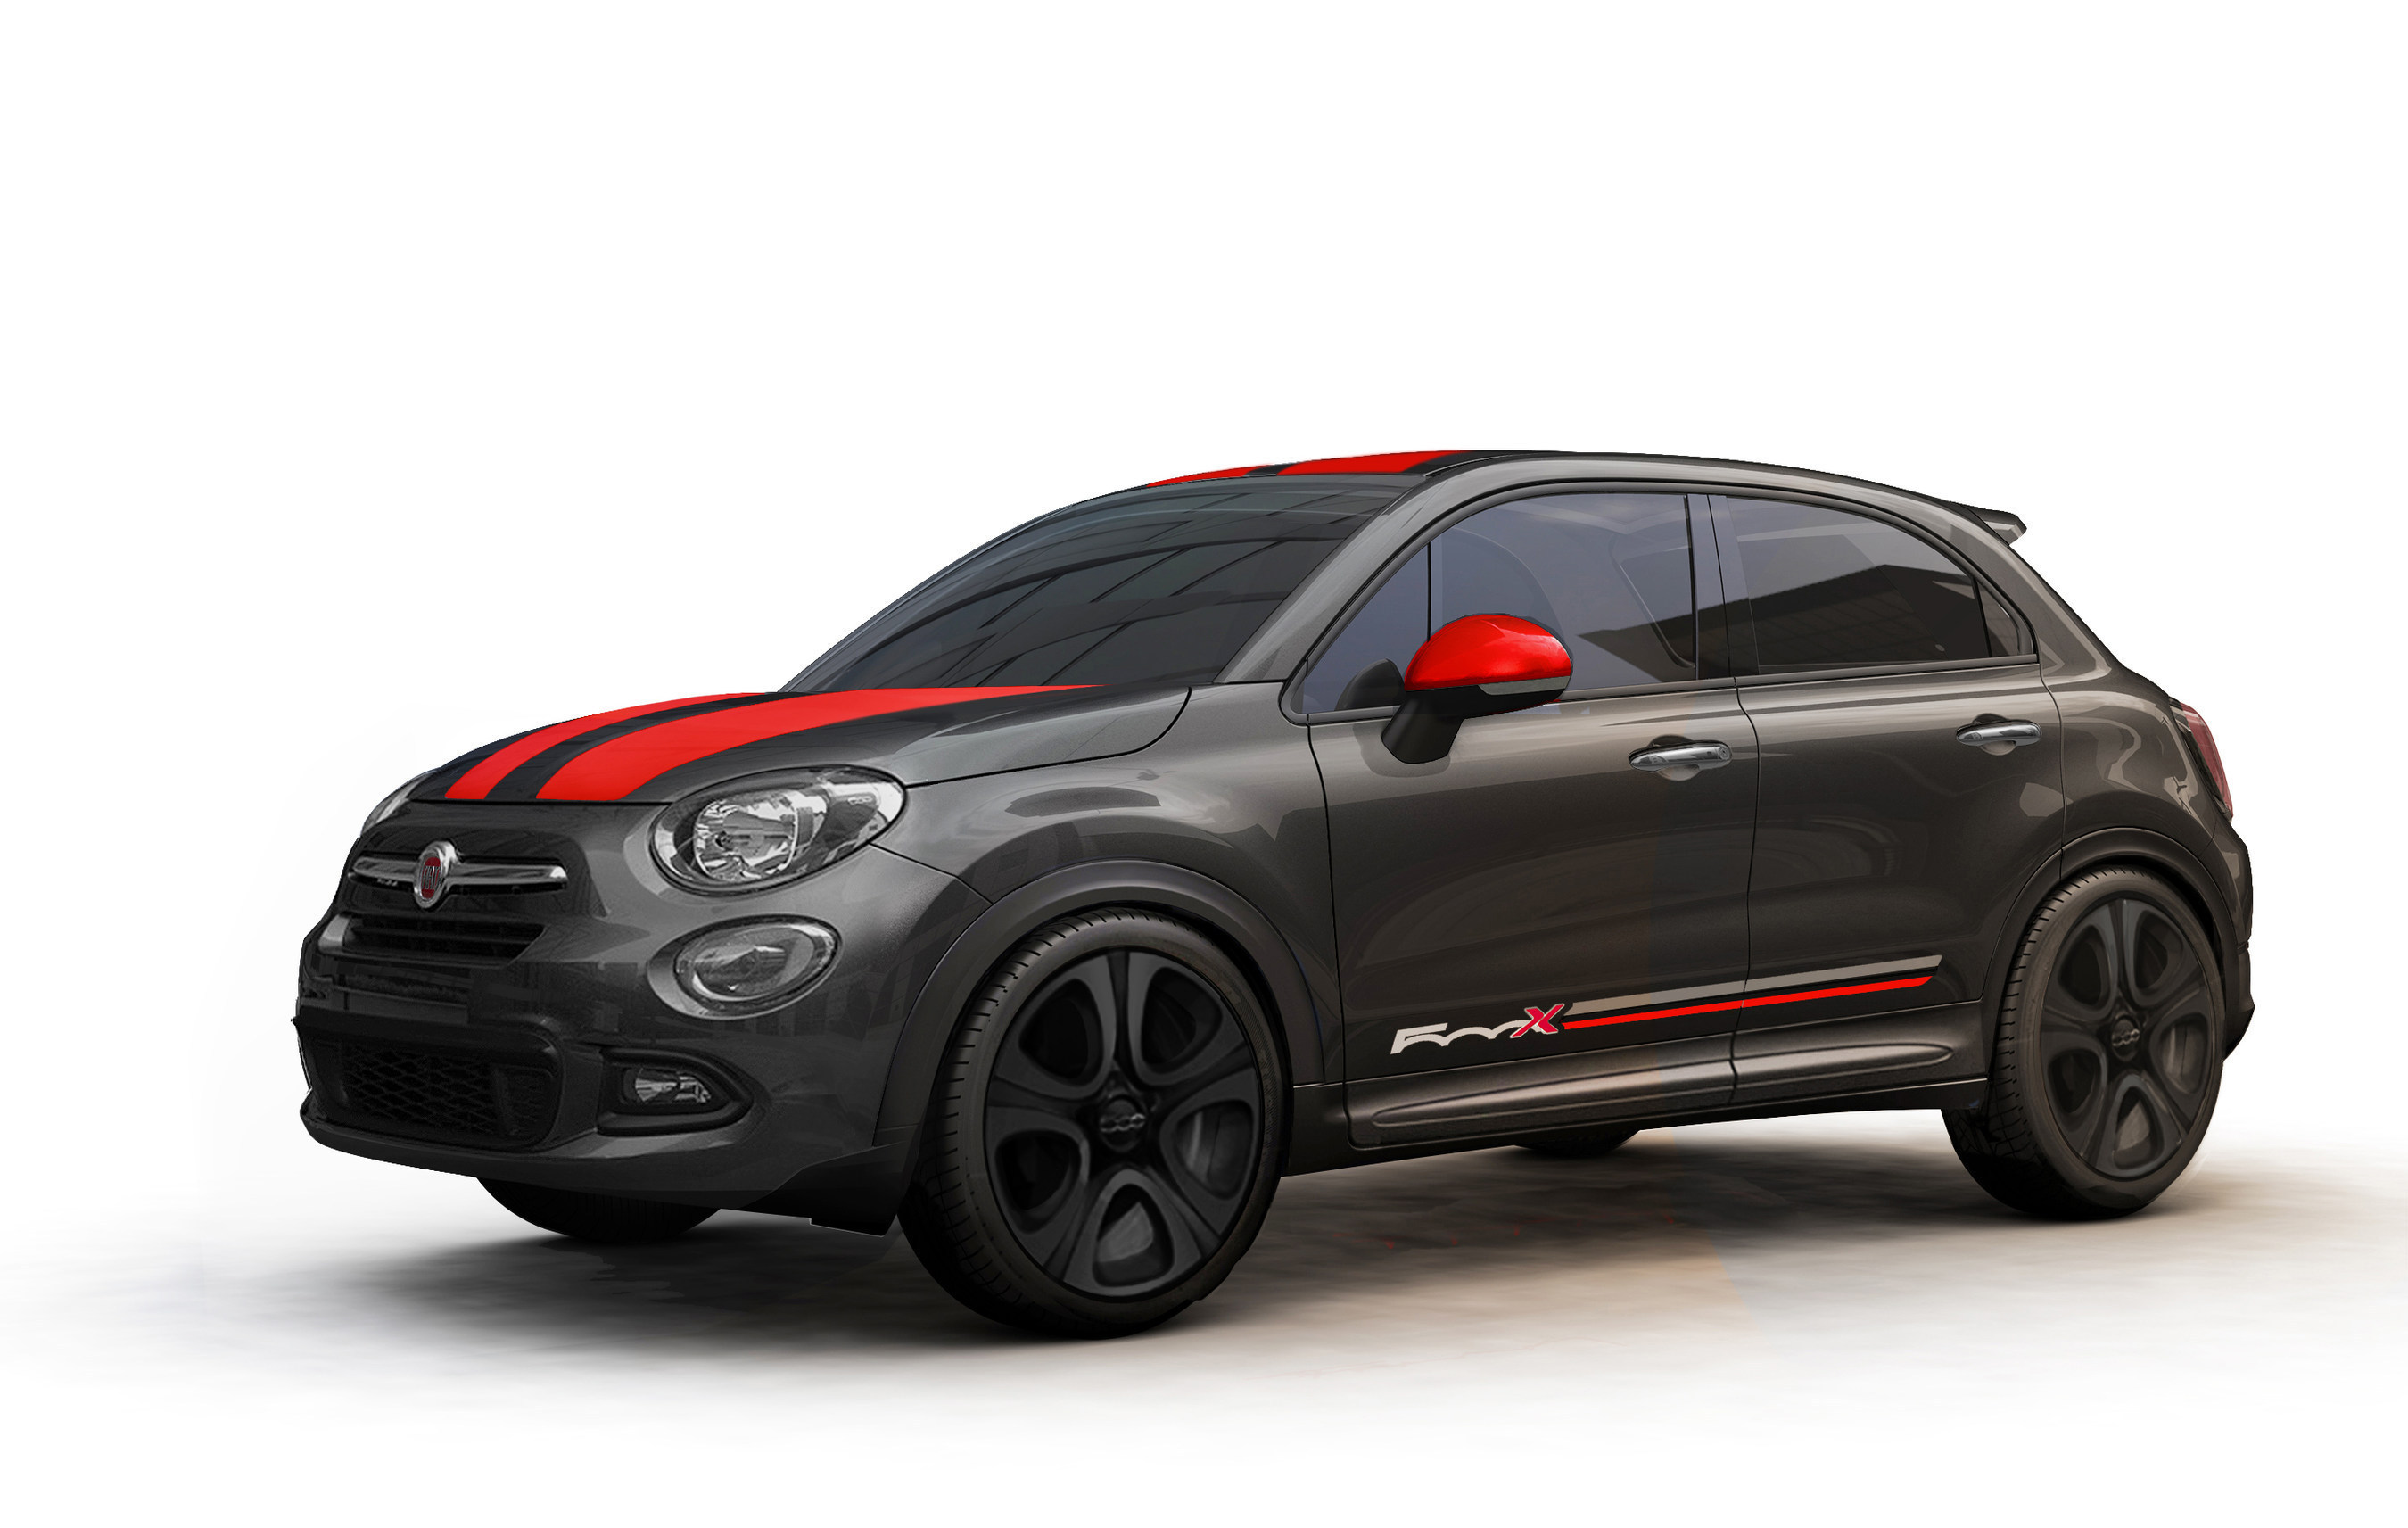 To give owners options for personalizing their new 2016 Fiat 500X vehicles, Mopar will offer more than 100 accessories when the new compact crossover hits showrooms.